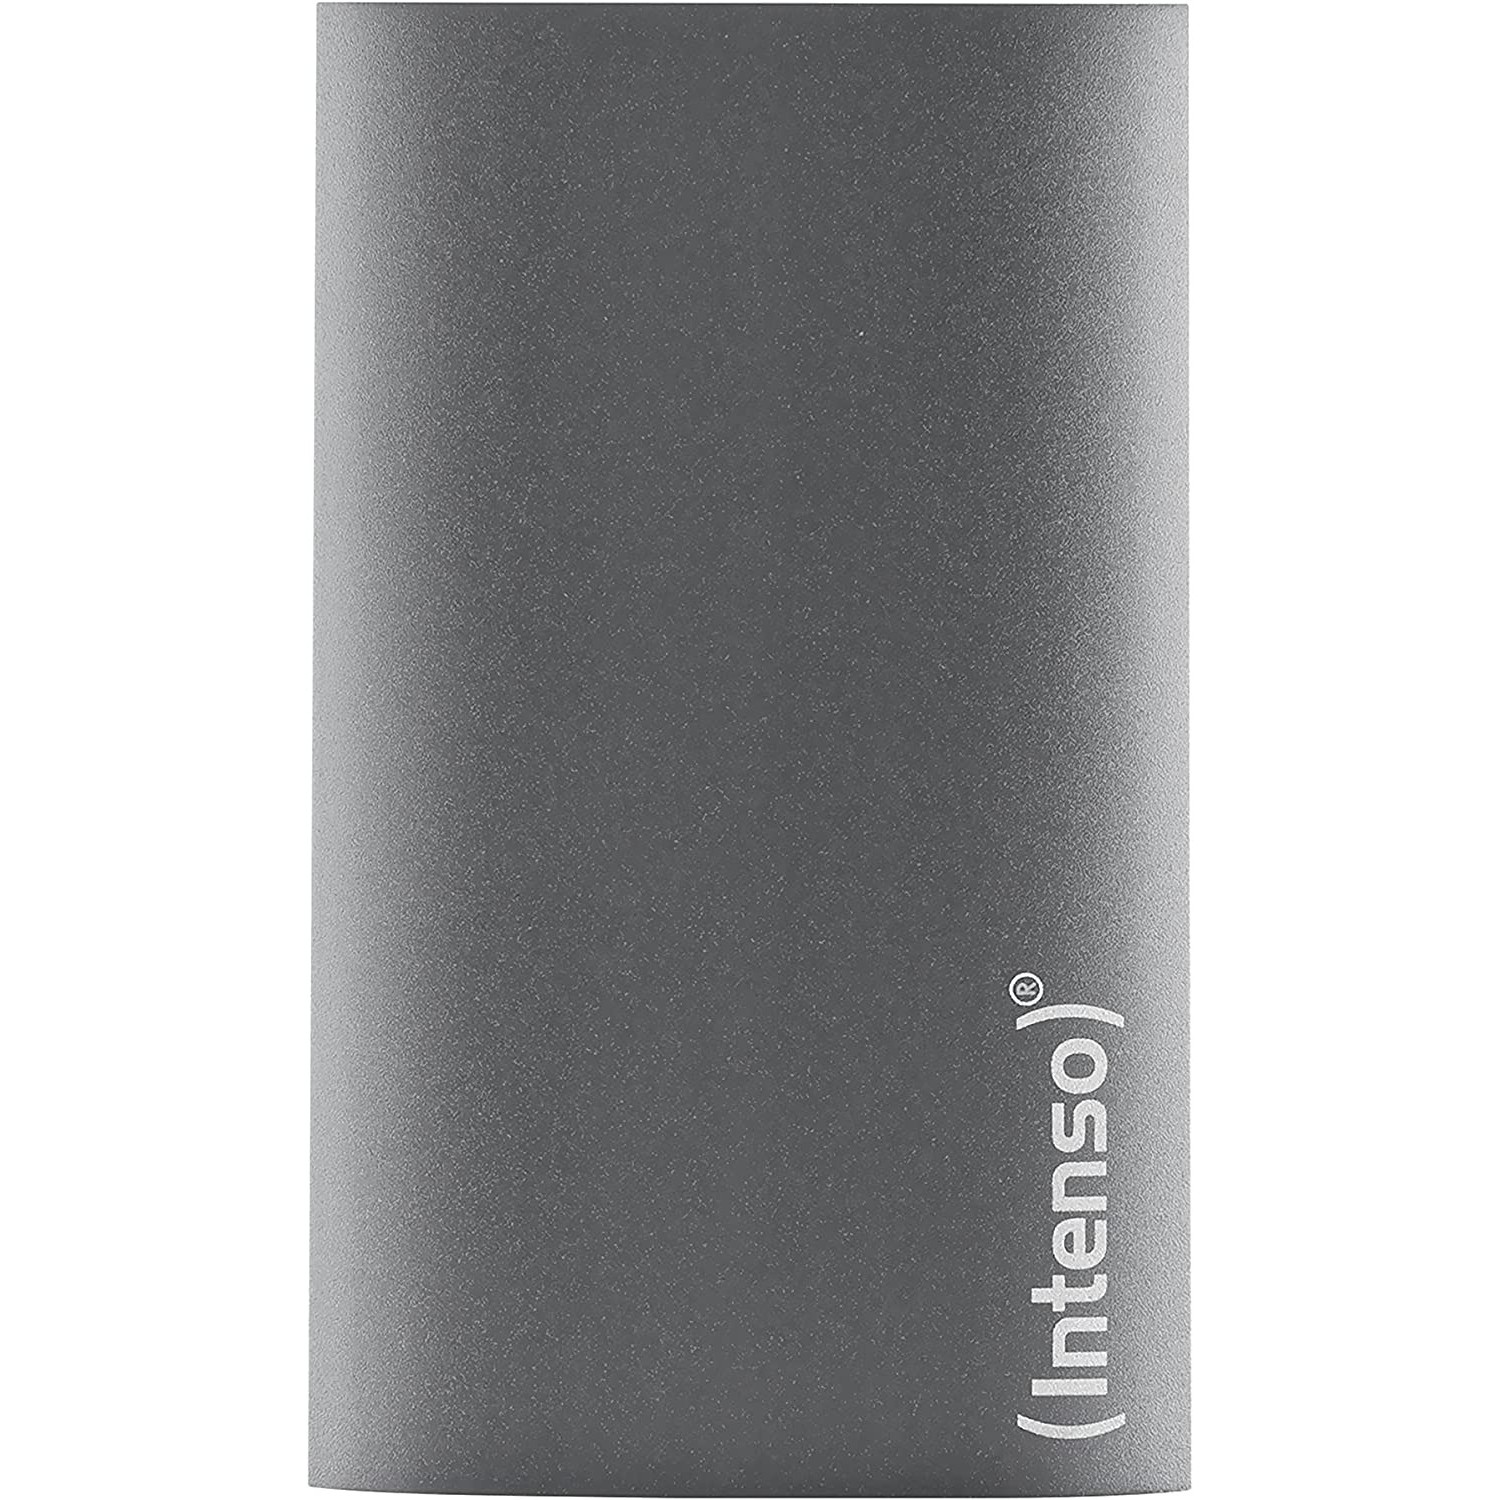 Intenso 3823470 external solid state drive - 3823470